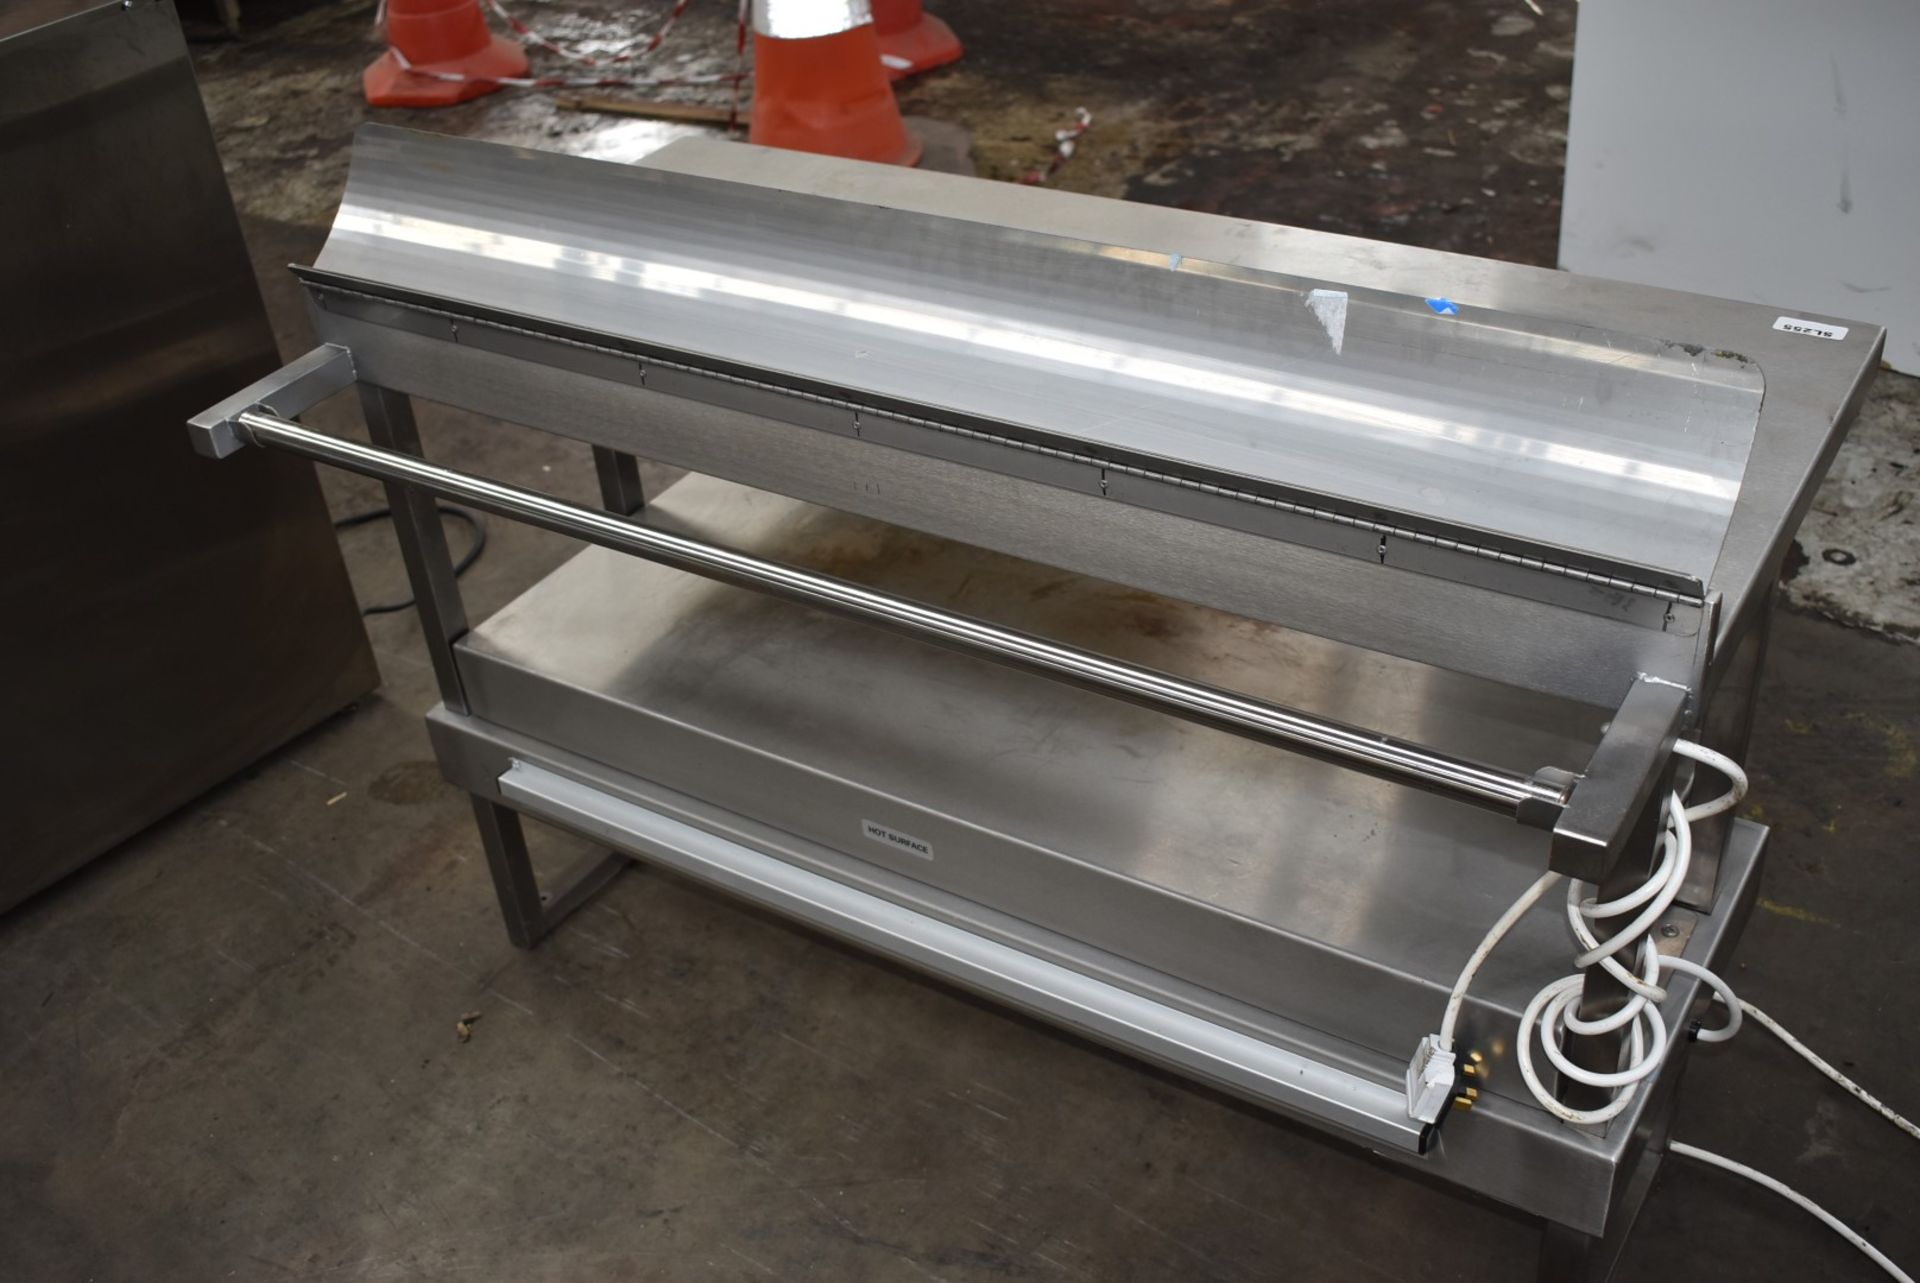 1 x Stainless Steel Bench Mounted Passthrough Food Warmer With Ticket Rails Ref SL255 WH4 - - Image 5 of 6